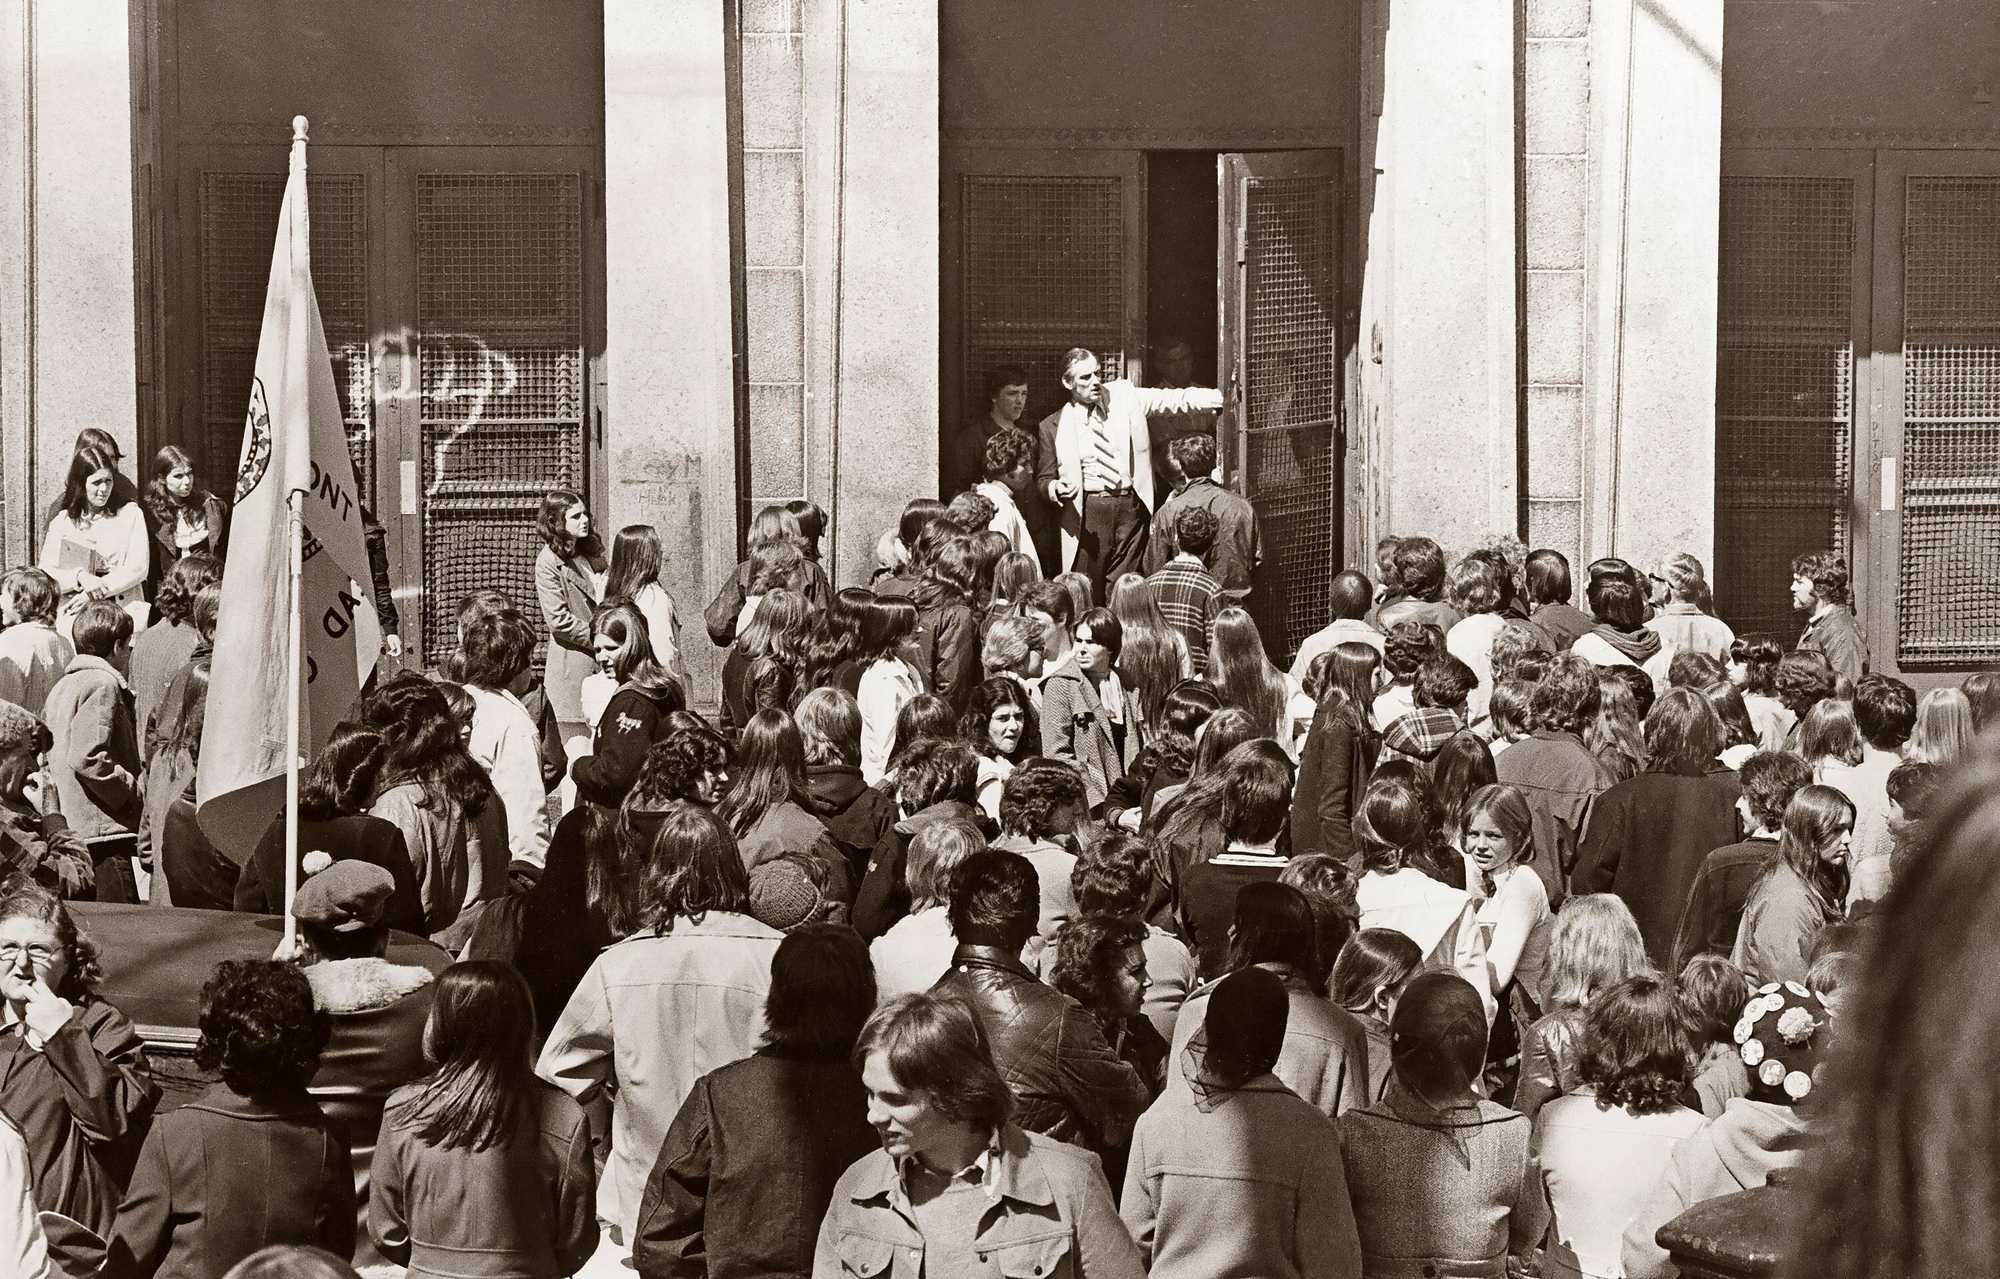 Charlestown High School headmaster Frank Powers tried to close the doors after students walked out of classes in protest before noon on April 14, 1975. 